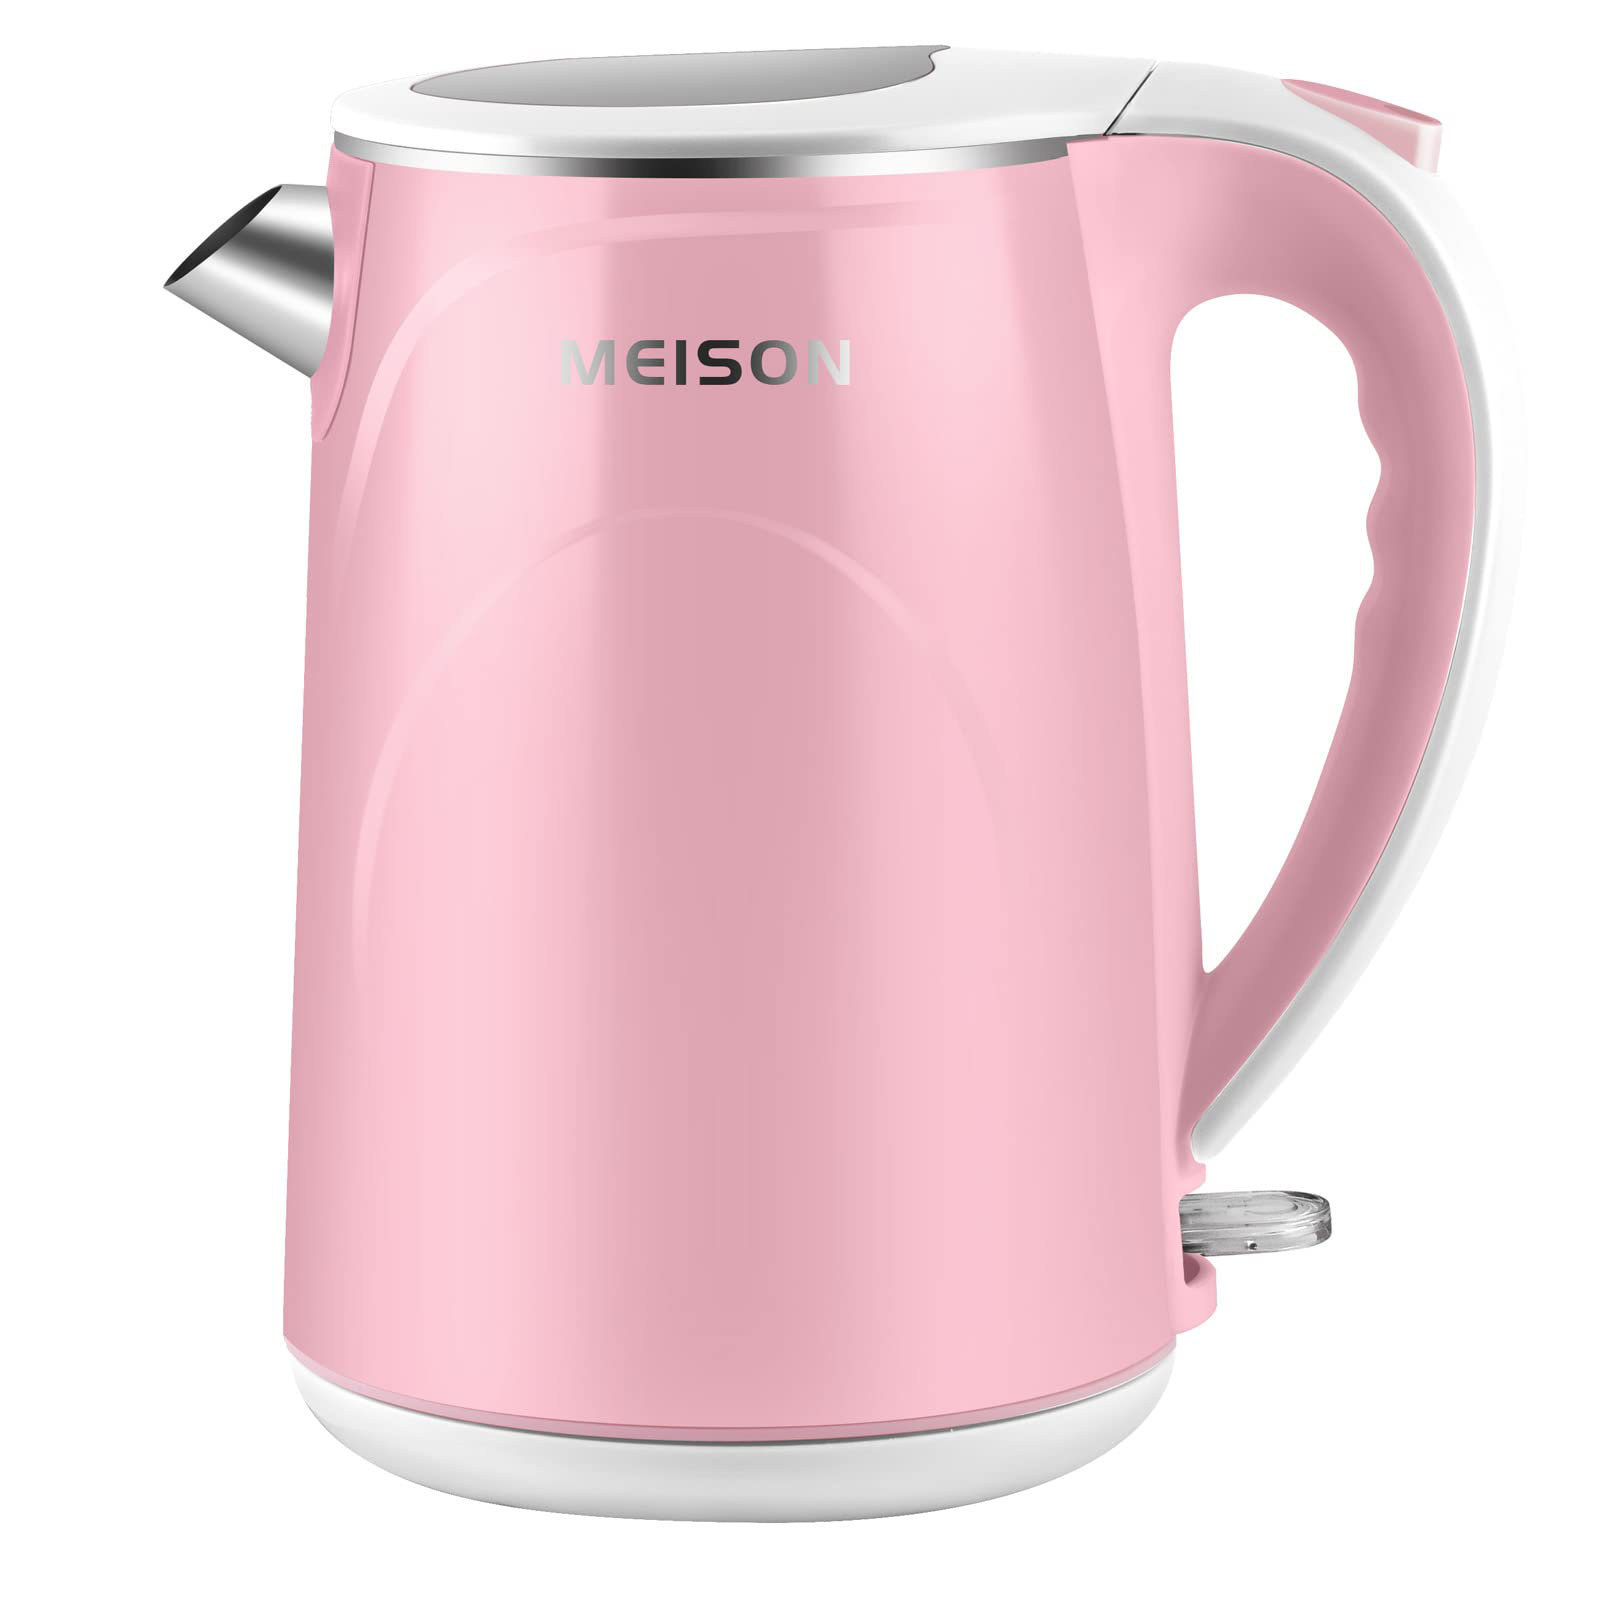 Haden Heritage 1.7 Liter Stainless Steel Body Retro Style Electric Kettle,  Pink